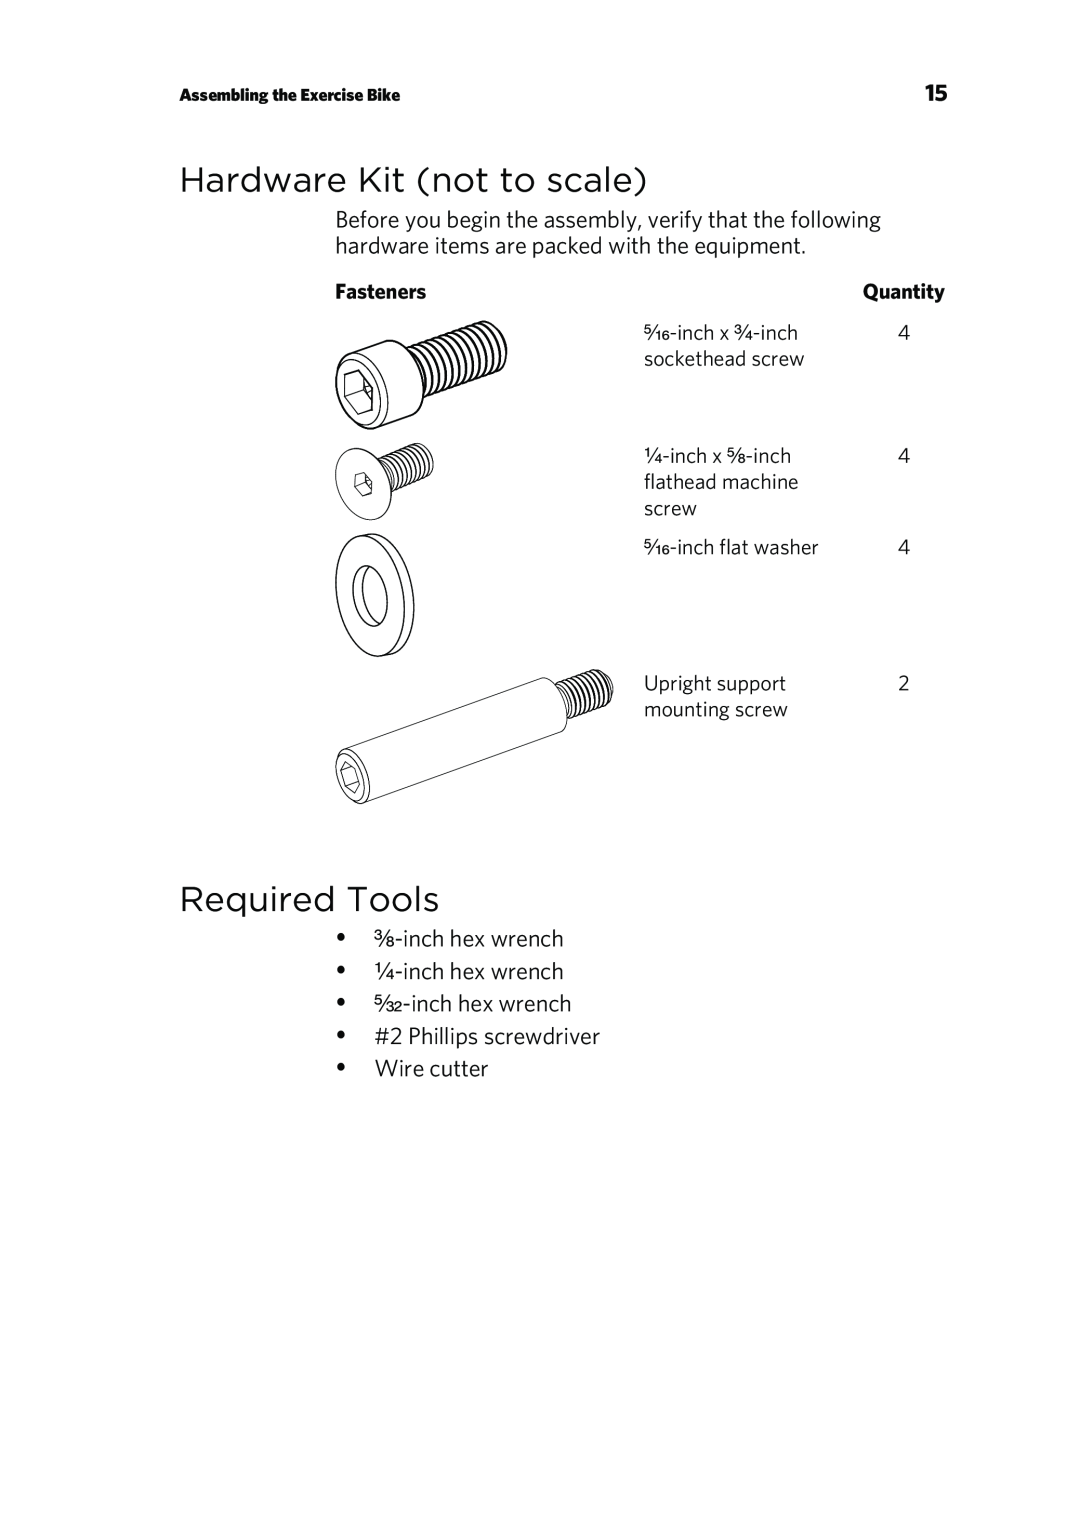 Precor P80 Hardware Kit not to scale, Required Tools, ³₈-inchhex wrench ¹₄-inchhex wrench, Wire cutter, Fasteners 